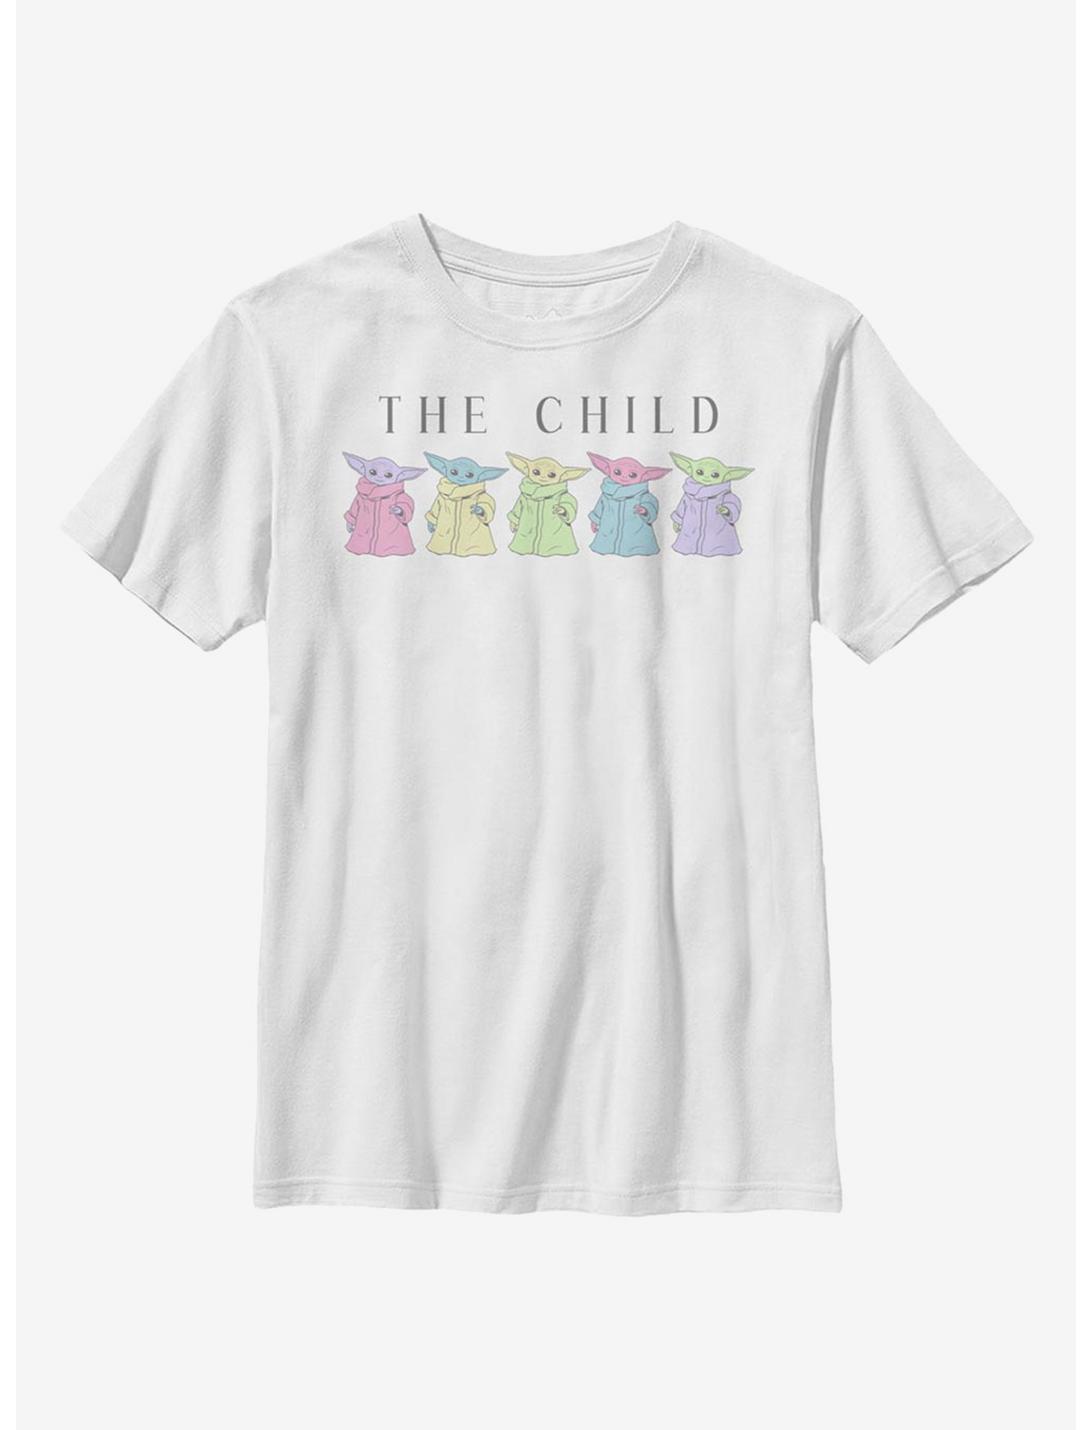 Star Wars The Mandalorian The Child Colors Youth T-Shirt, WHITE, hi-res